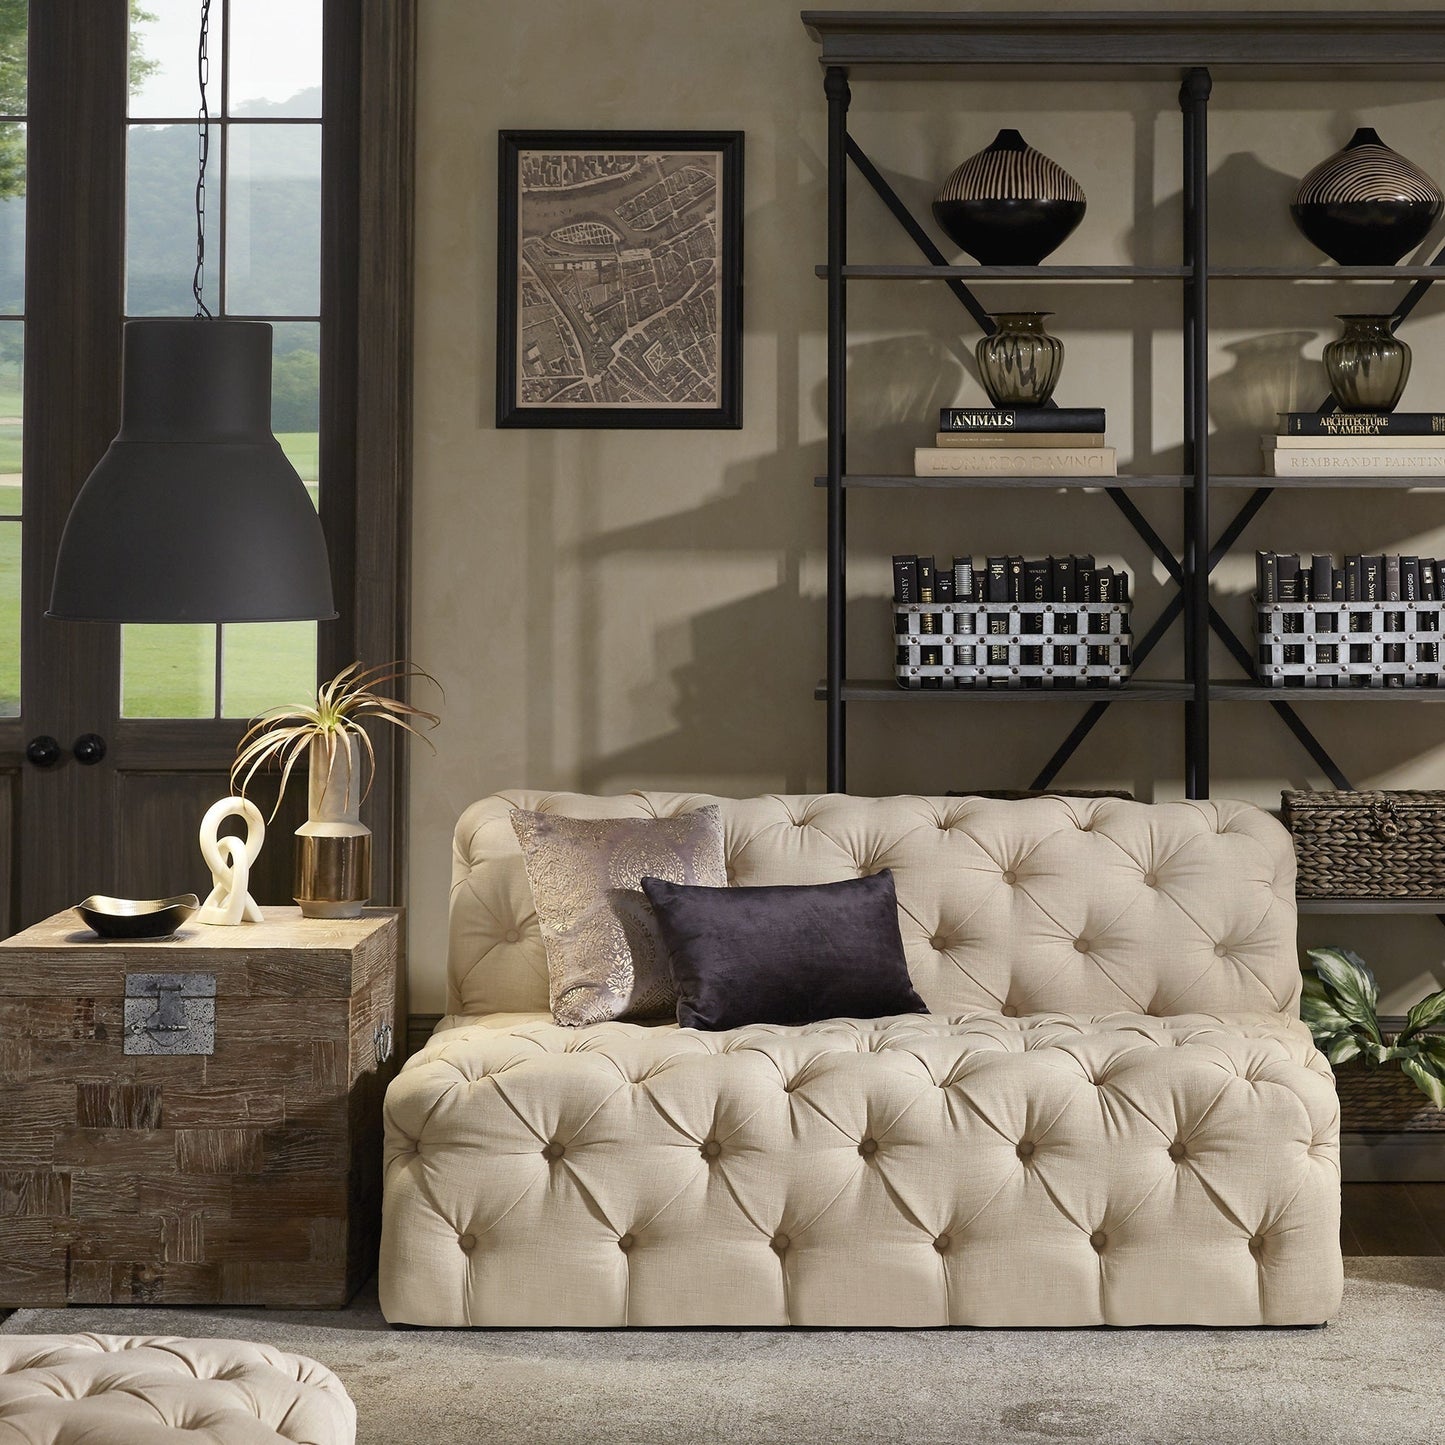 Beige Linen Tufted Chesterfield Modular Sectional - 4-Seat, L-Shaped, Right Arm Chaise Sectional